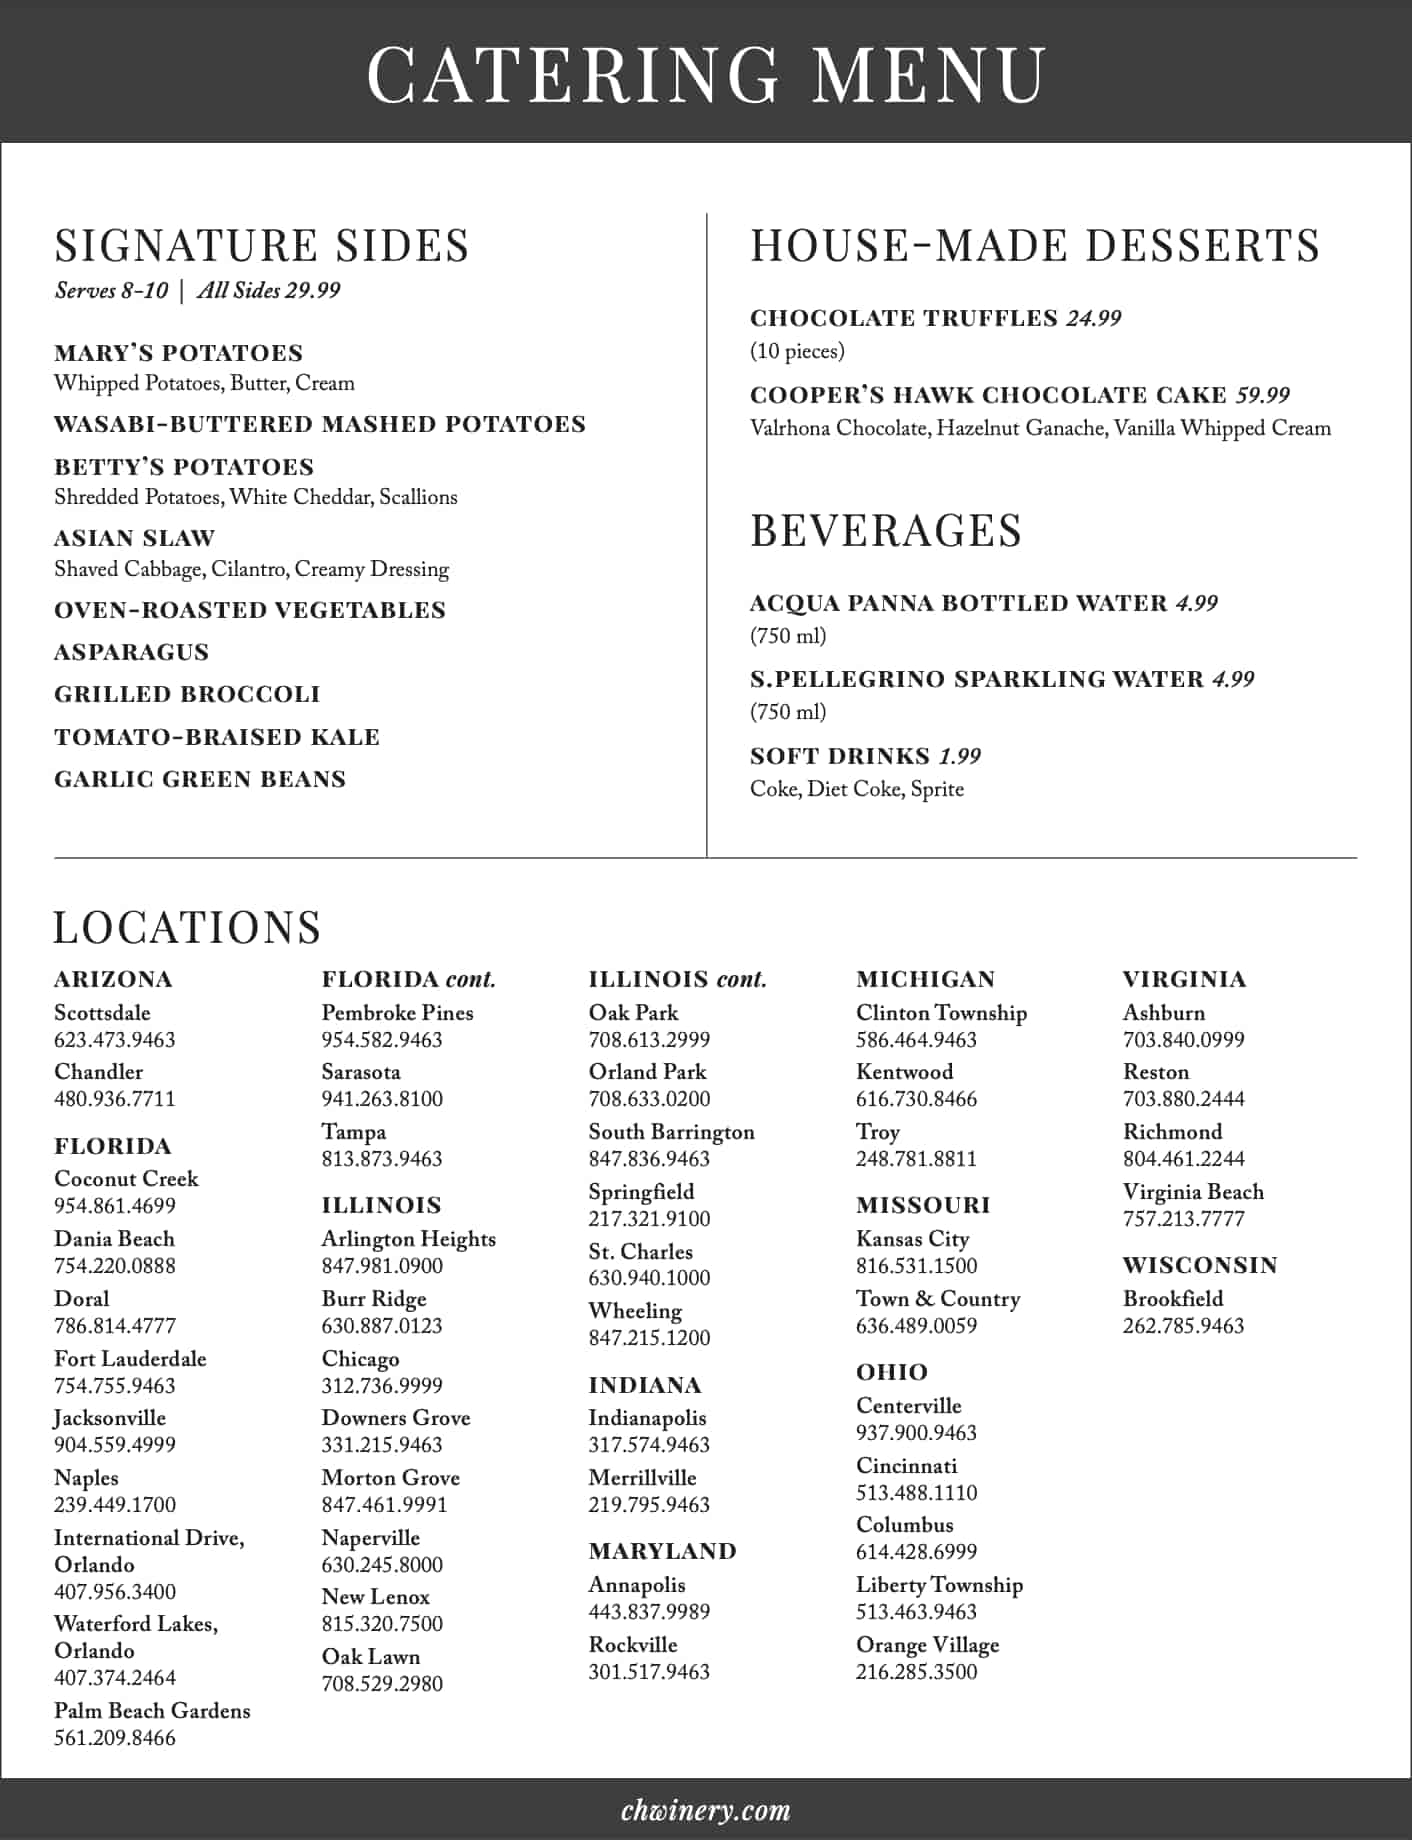 Cooper's Hawk Winery and Restaurant Catering Menu